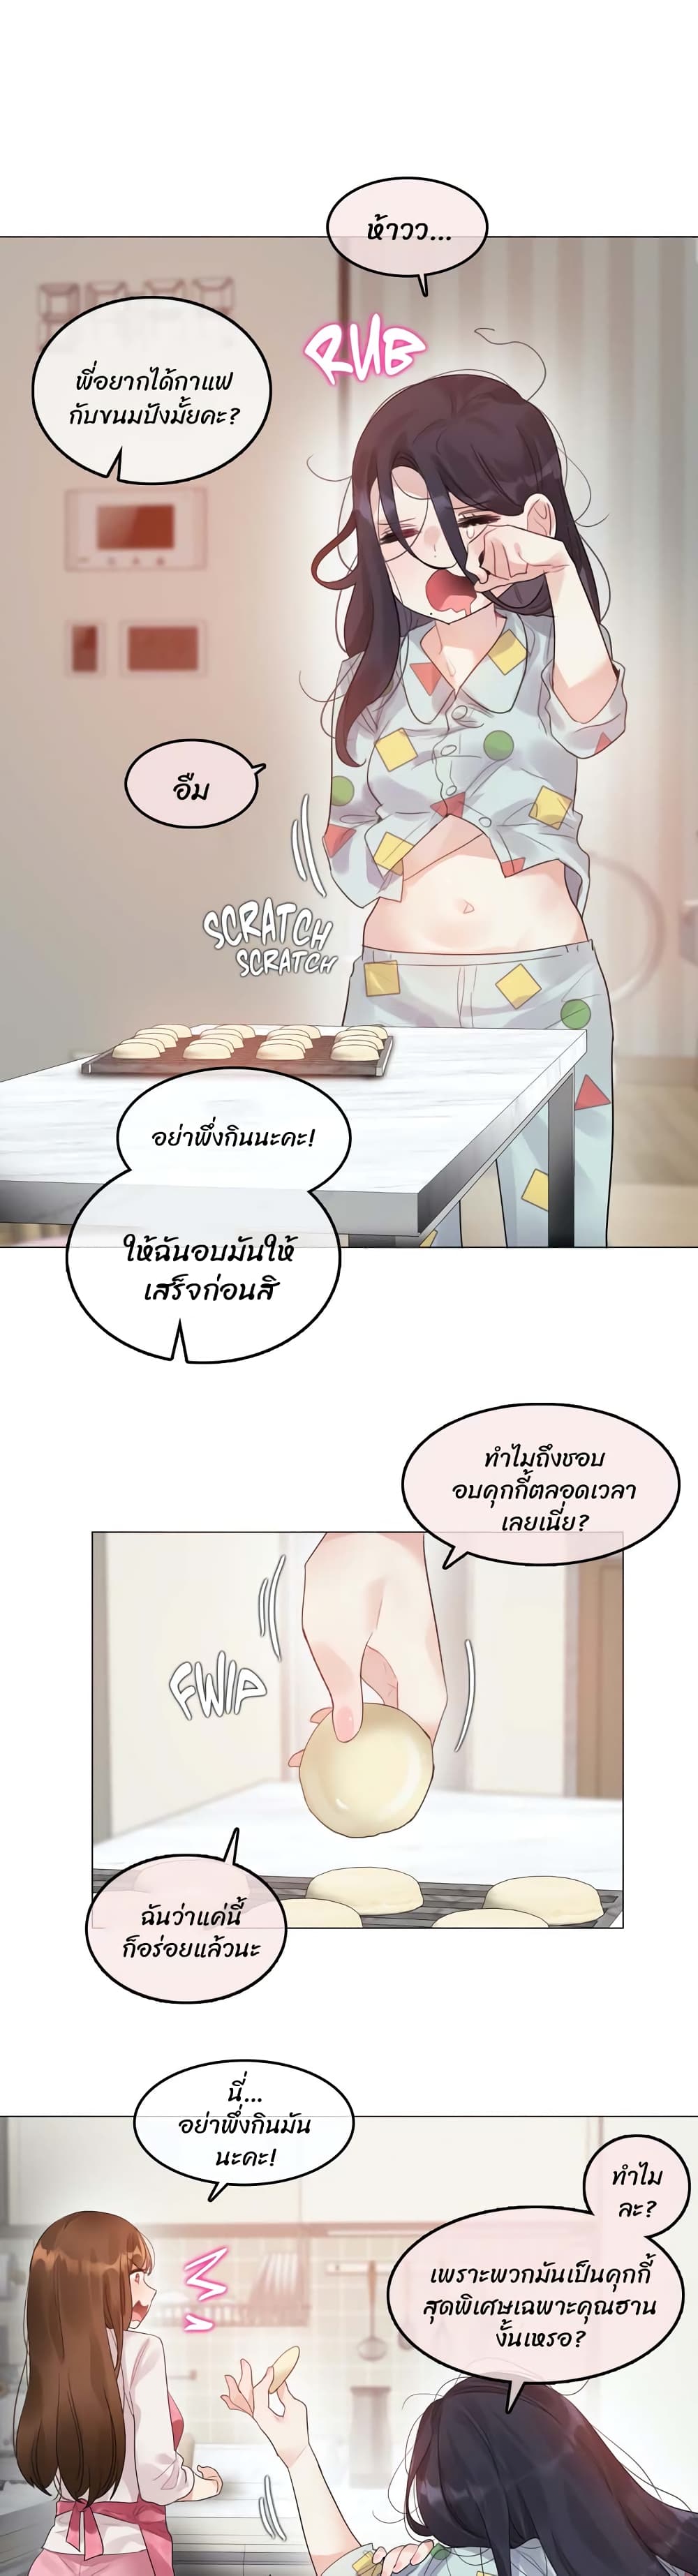 A Pervert's Daily Life 98 (2)